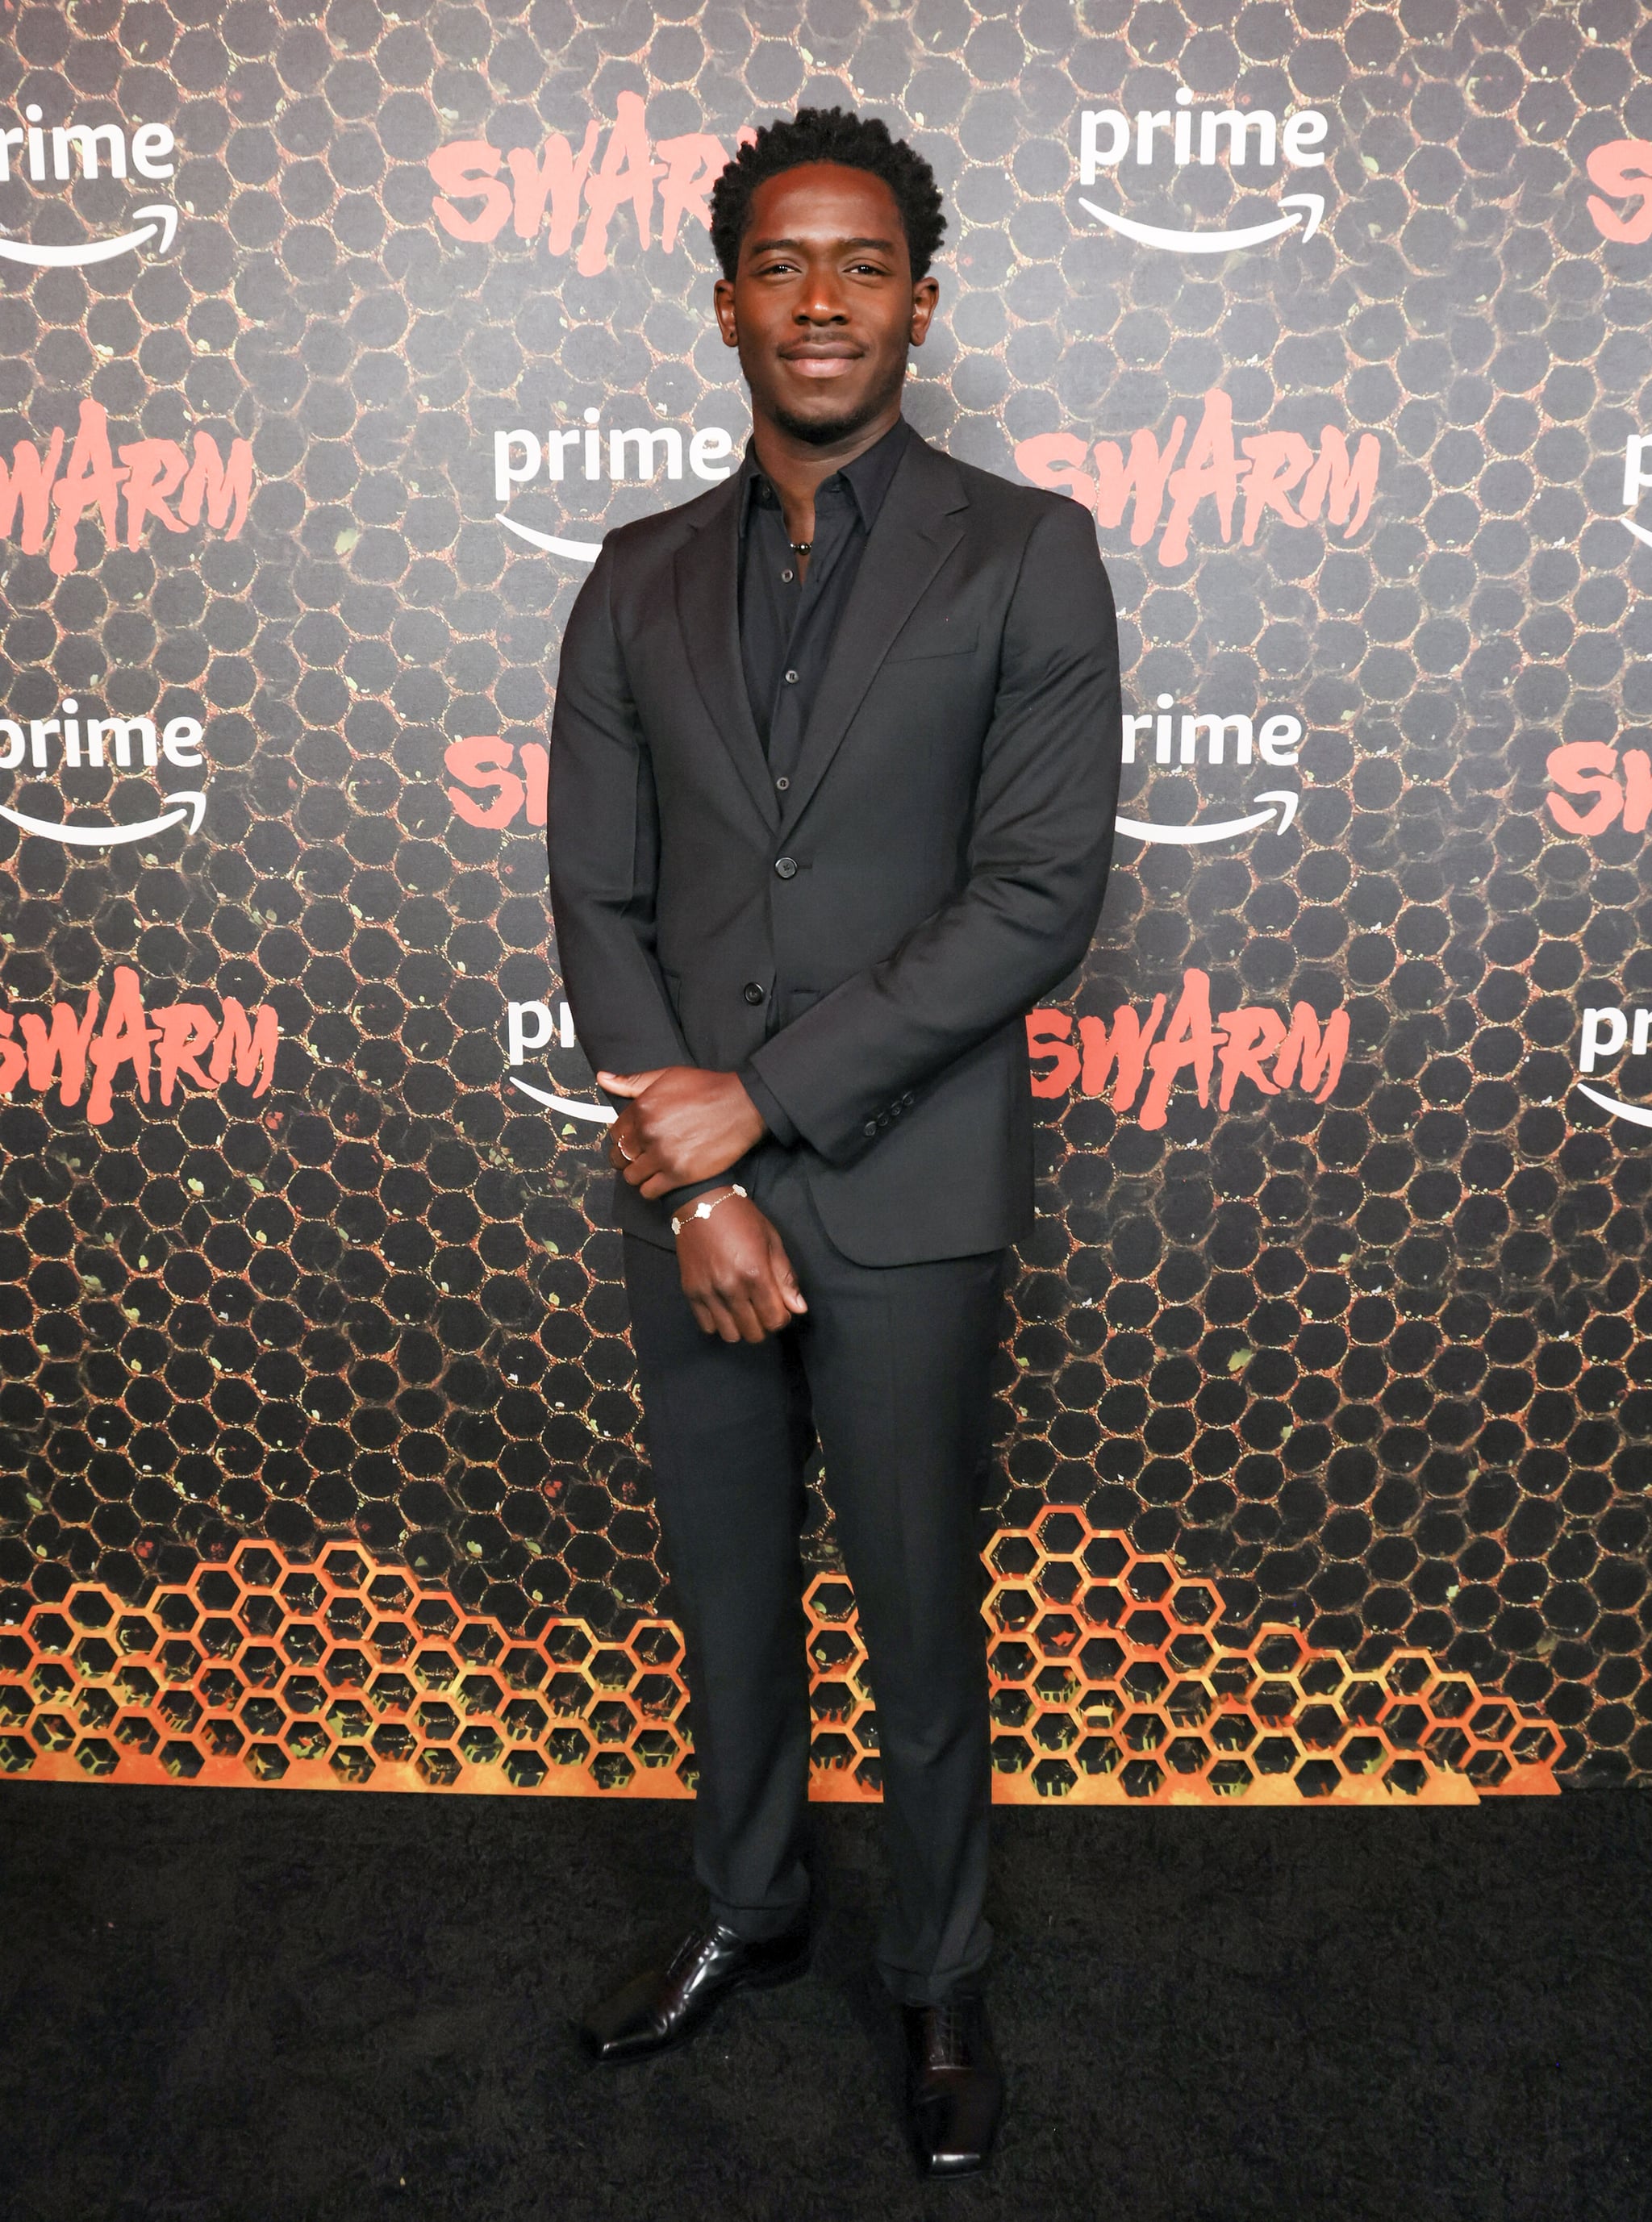 LOS ANGELES, CALIFORNIA - MARCH 14: Damson Idris attends the Los Angeles premiere of Prime Video's 